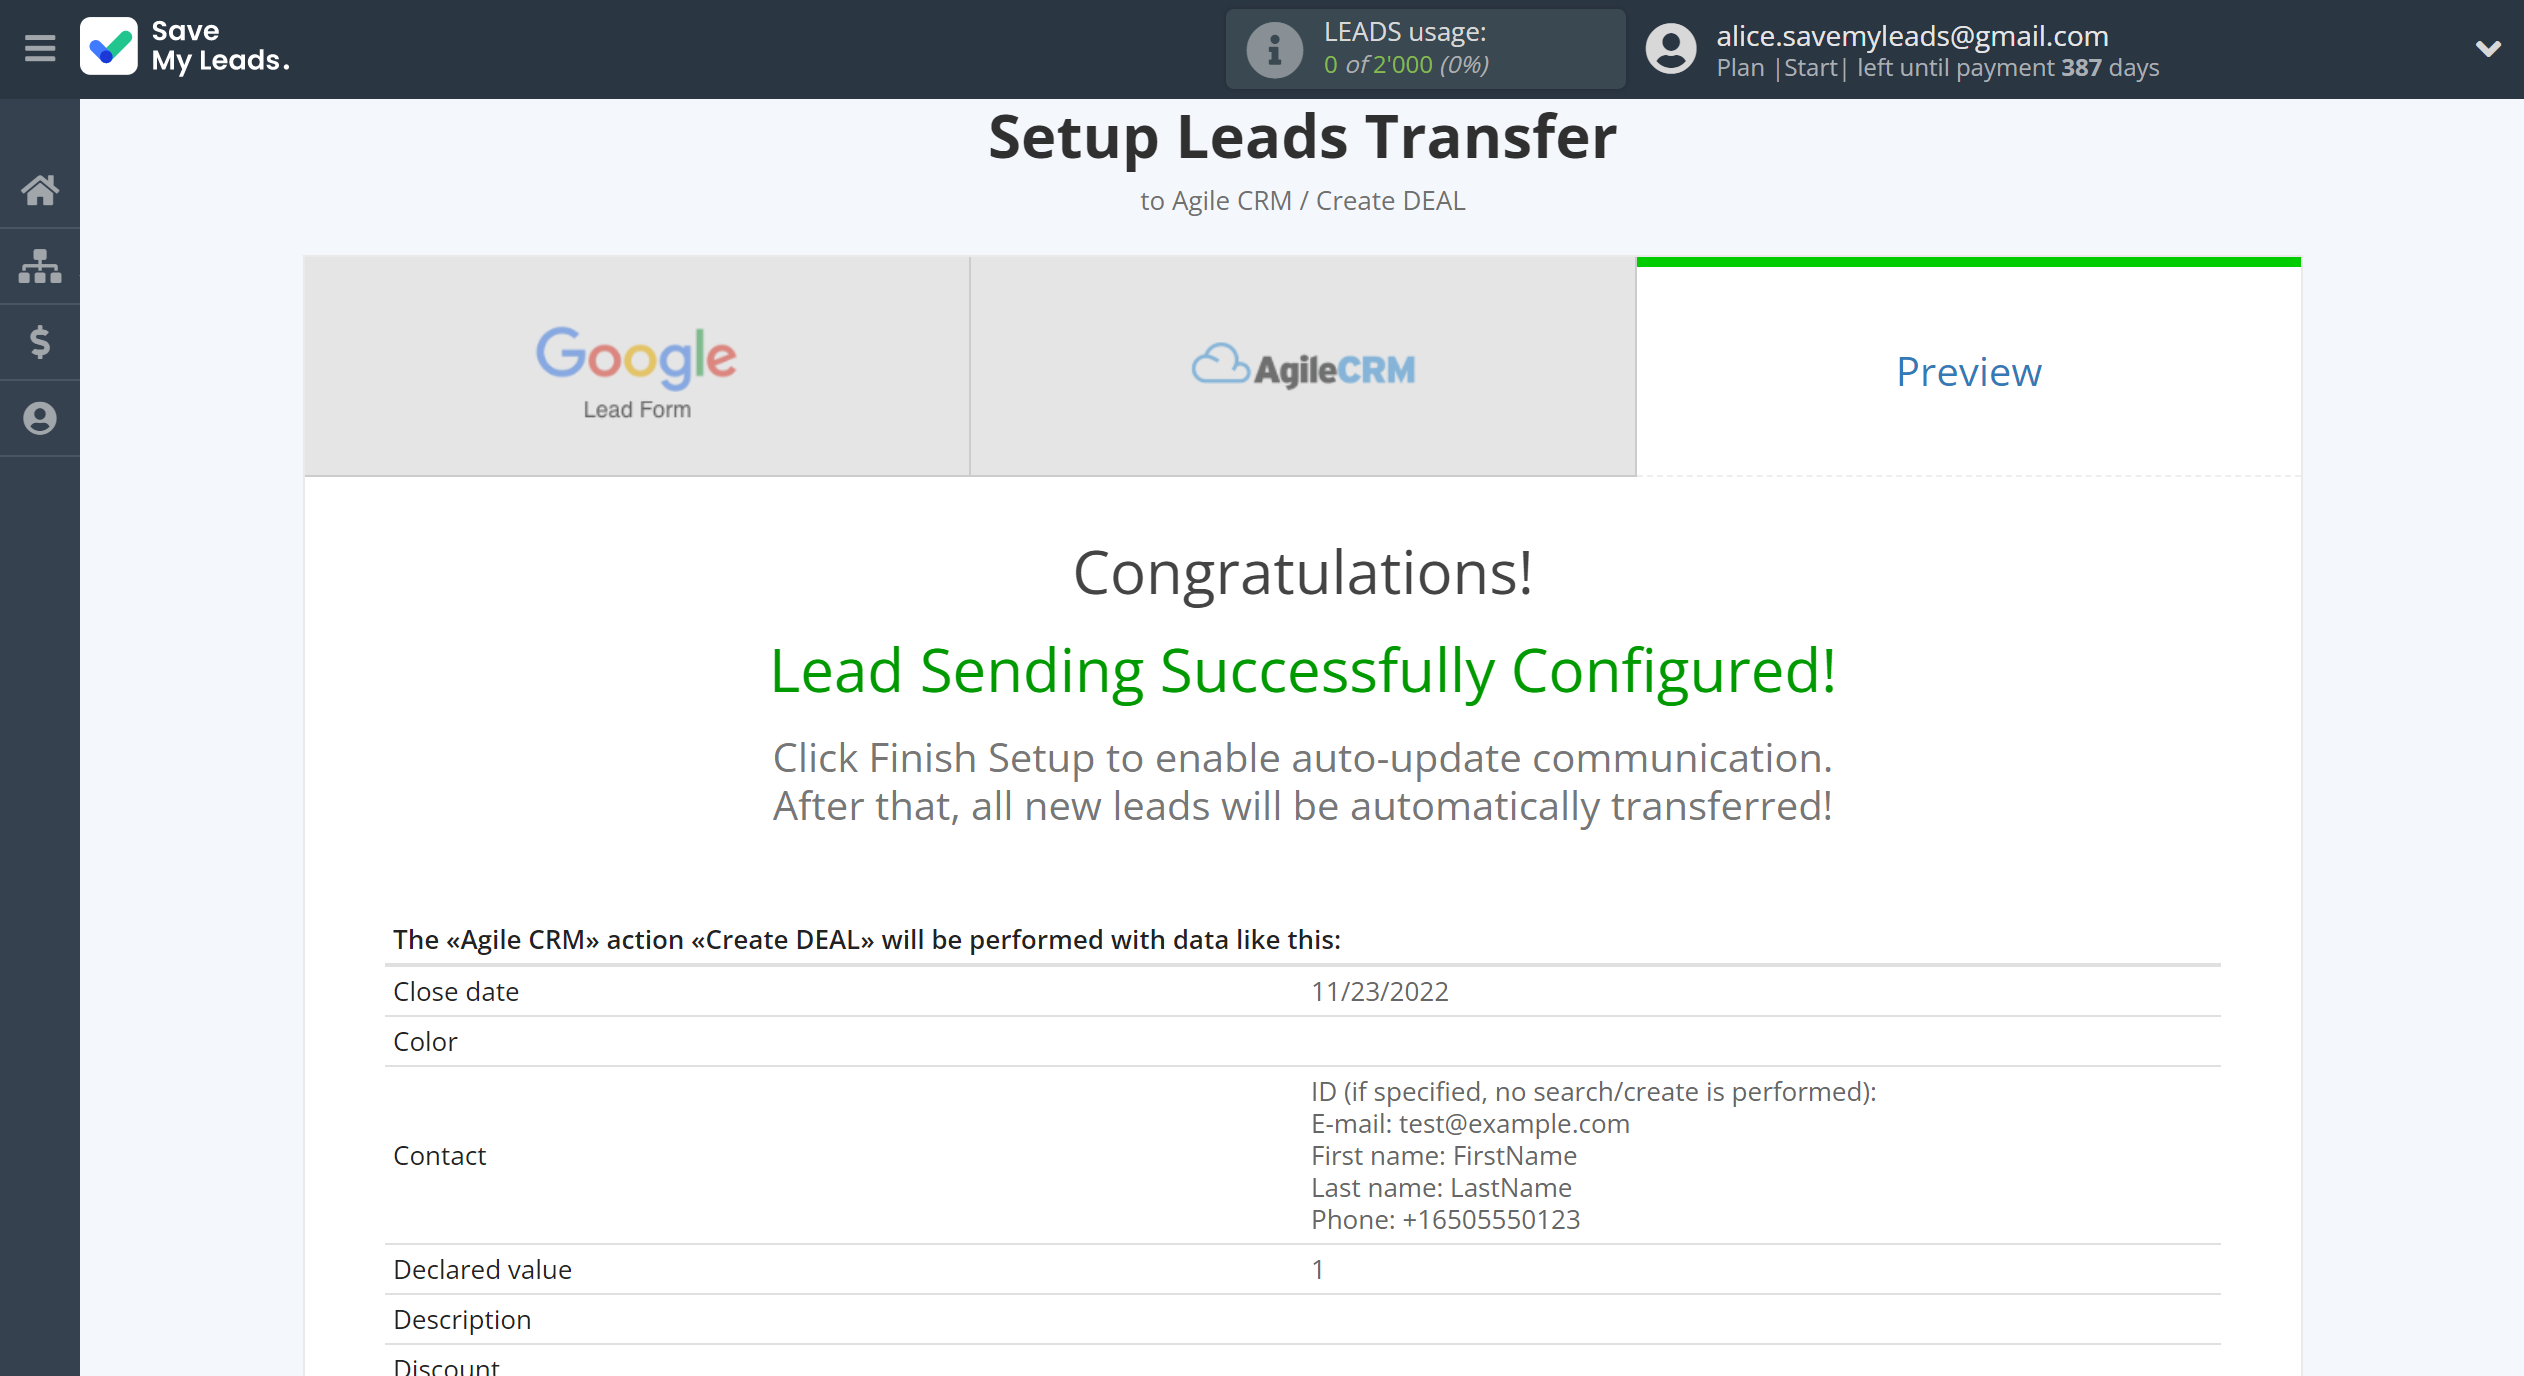 How to Connect Google Lead Form with AgileCRM Create Deal | Test data